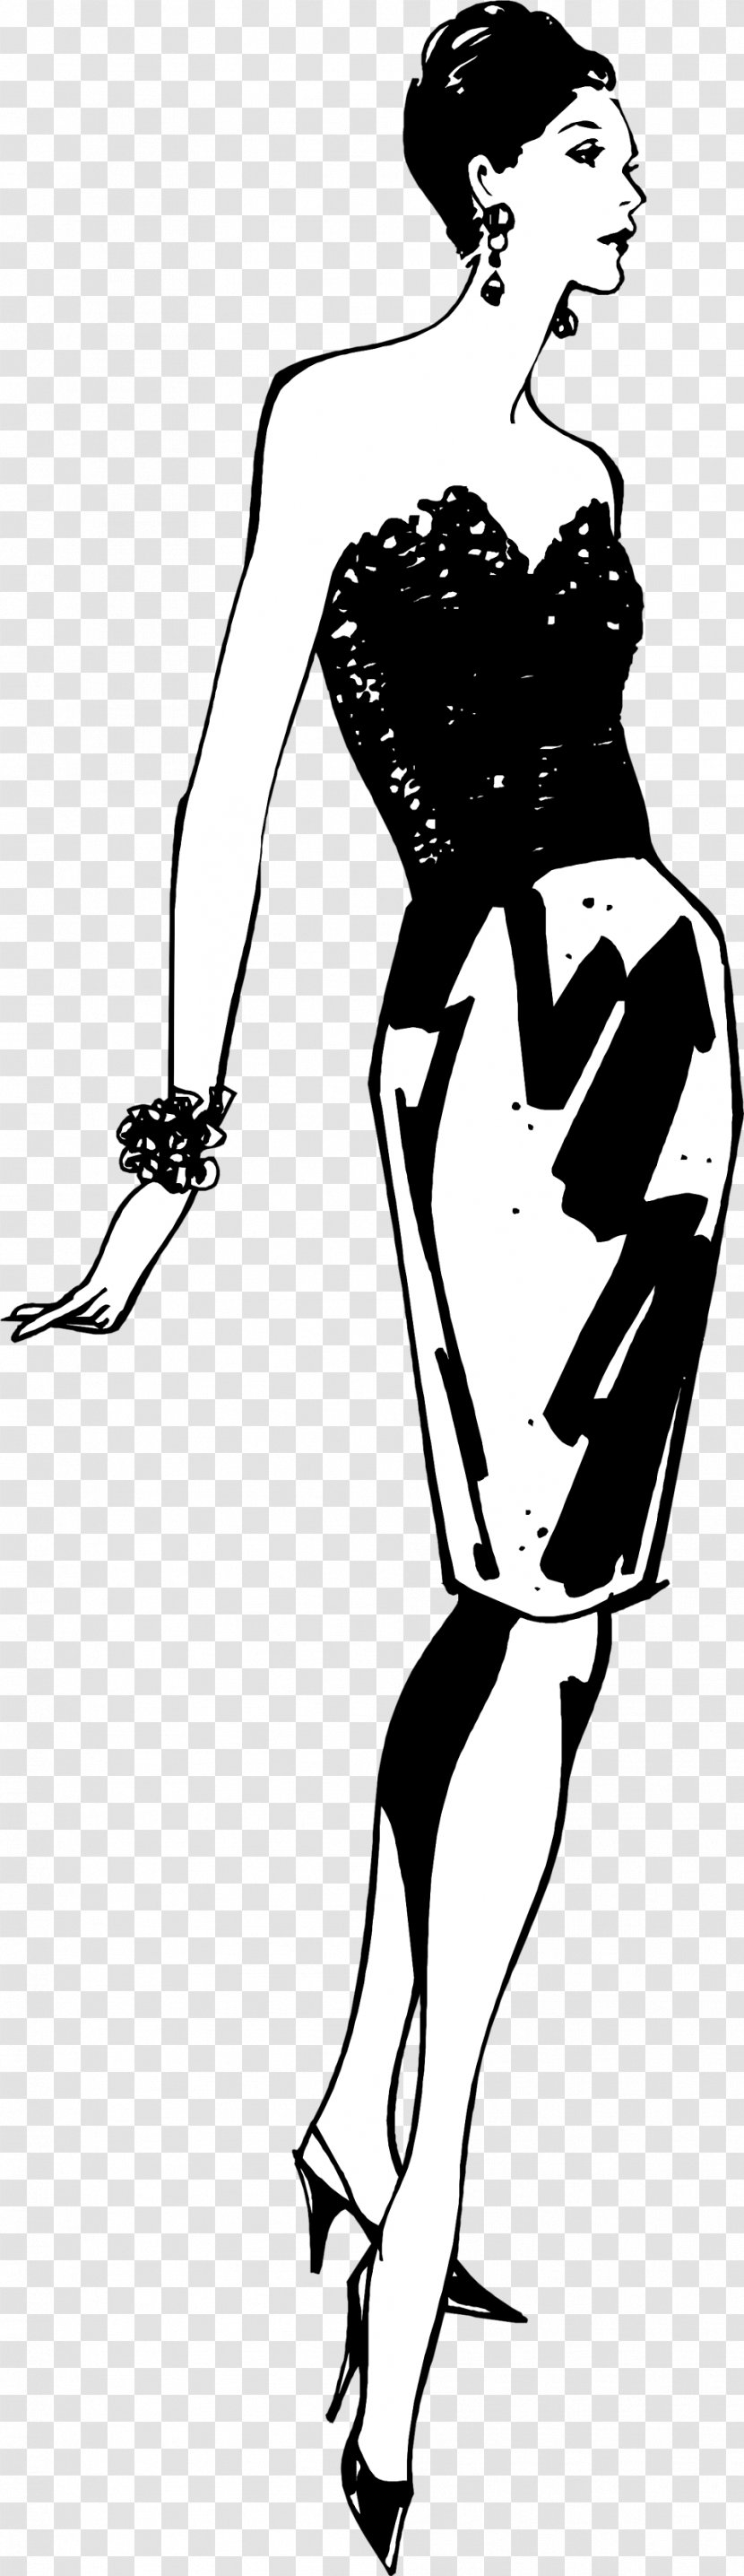 Clothing Line Art Monochrome Photography - Cartoon - Glamour Clipart Transparent PNG